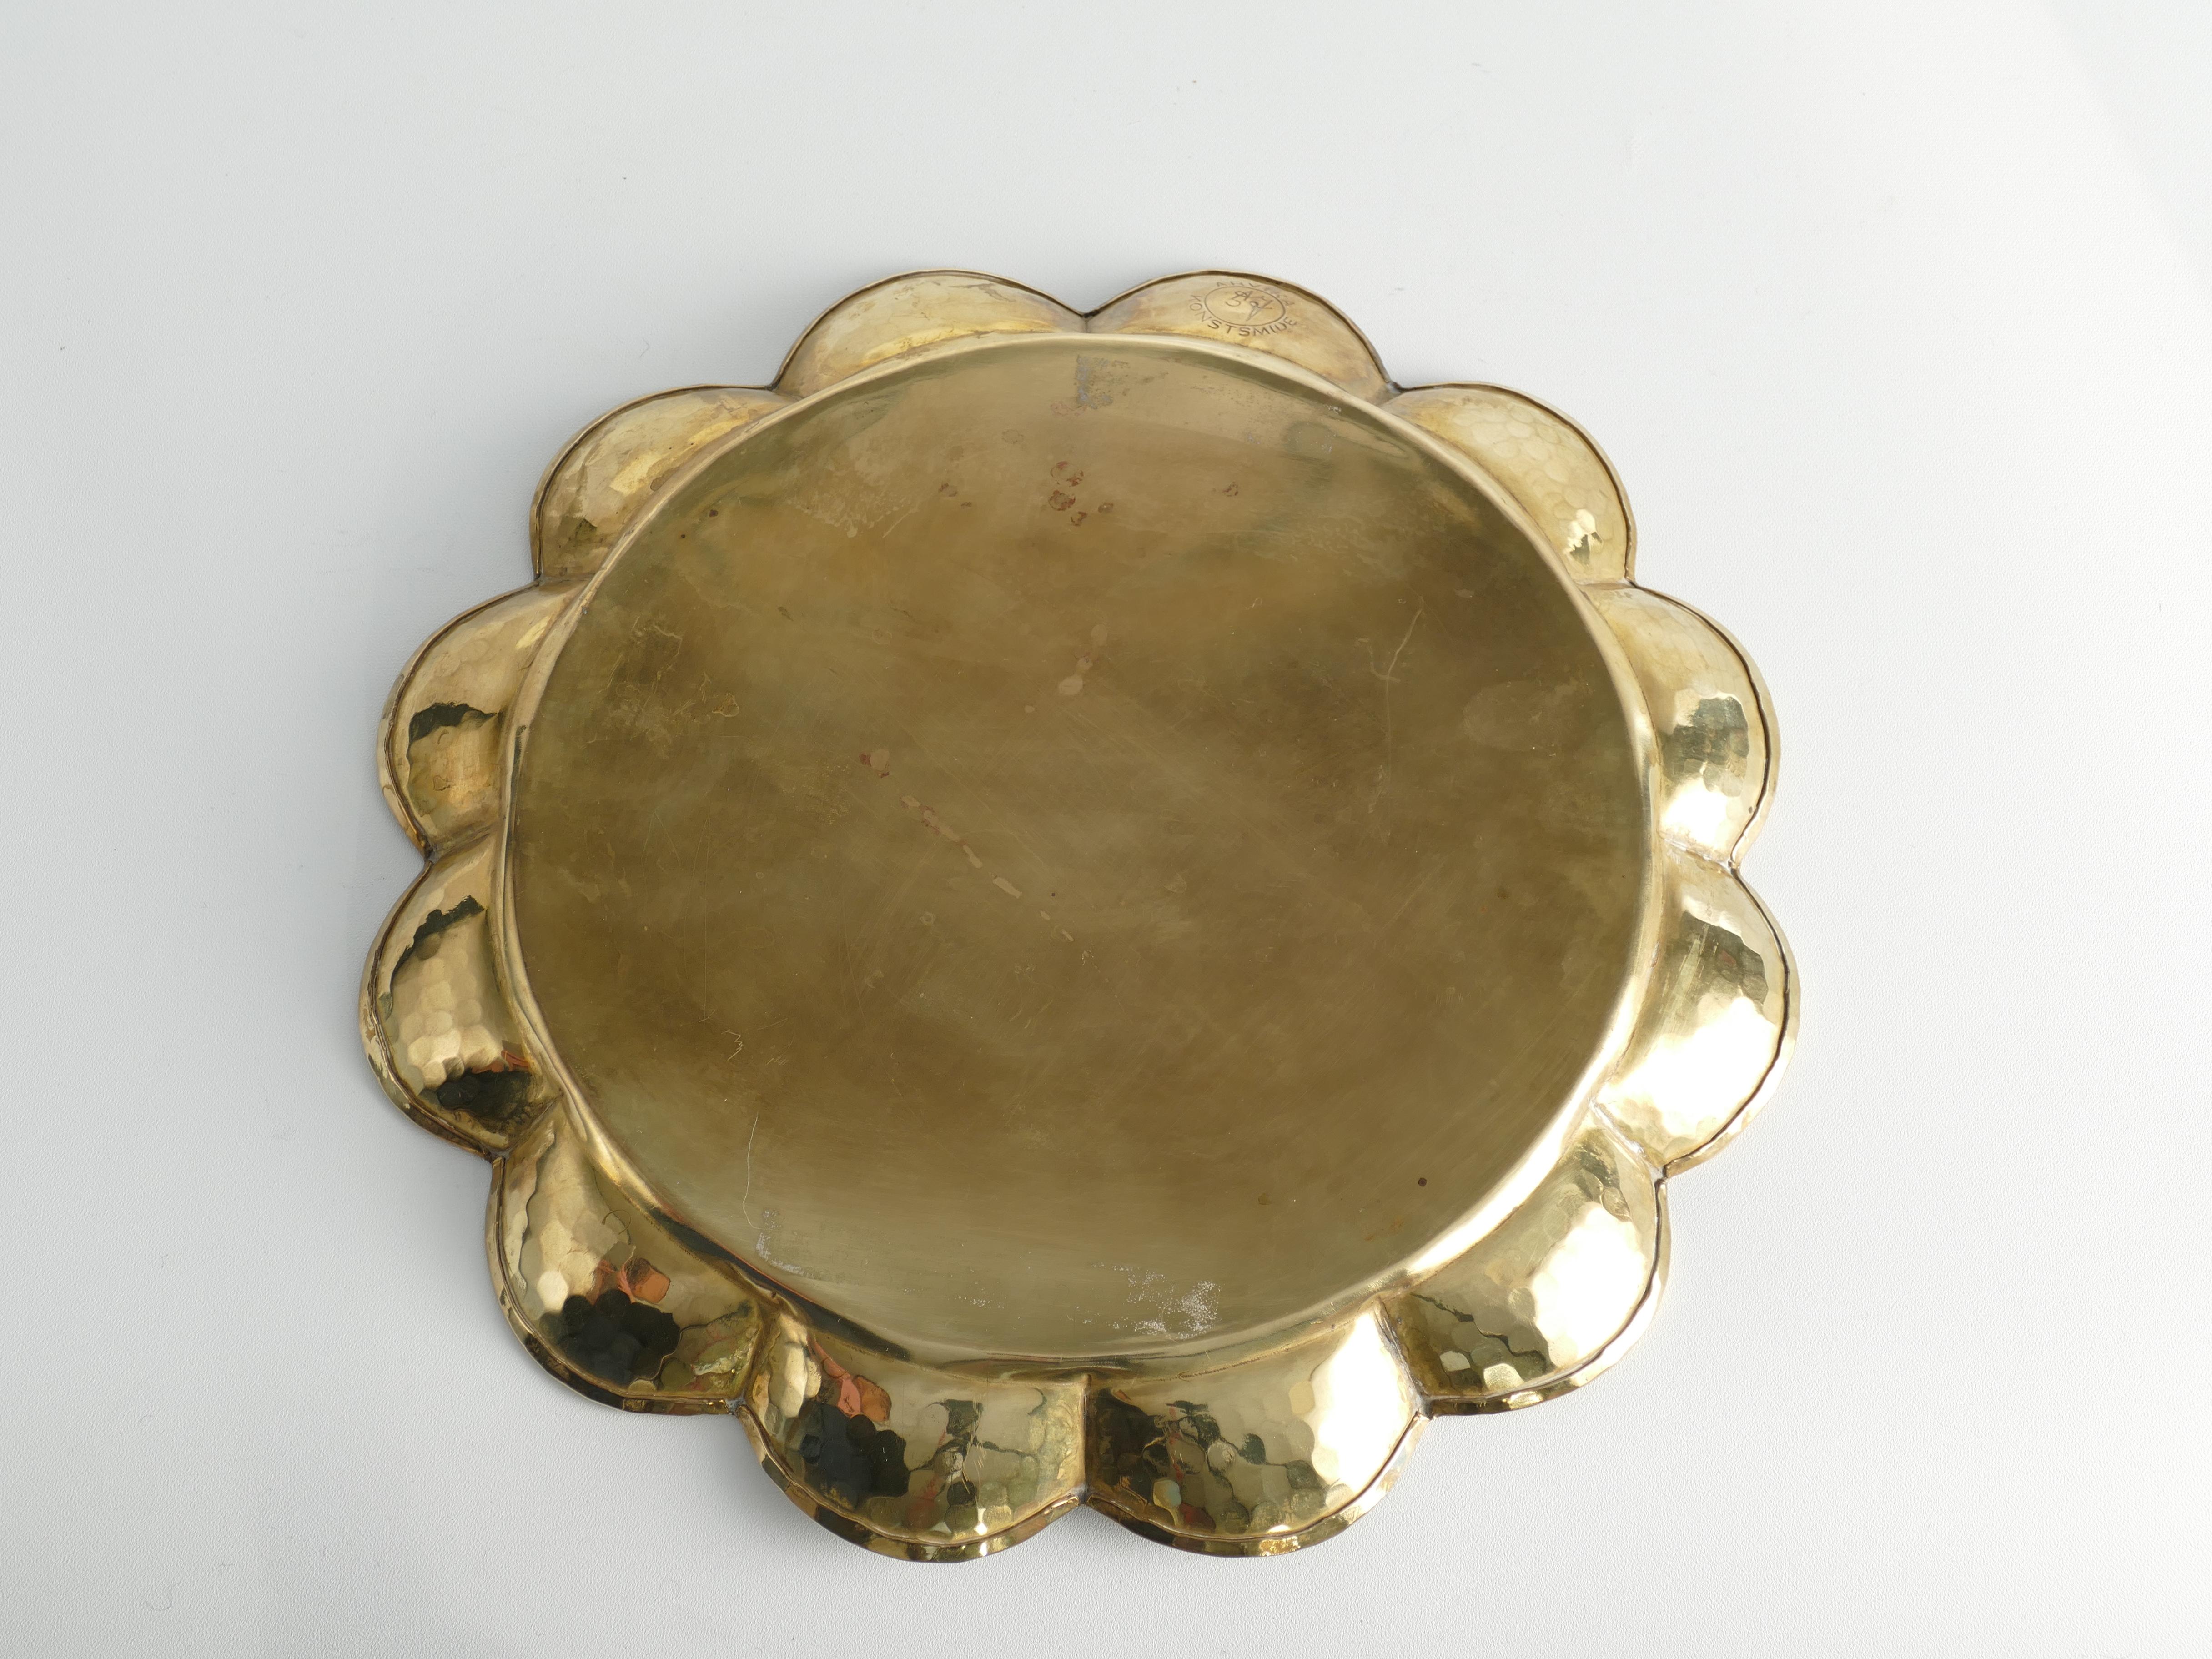 Hollywood Regency Round Brass Tray by Arvid Johansson, Arvika Konstsmide, Sweden In Good Condition For Sale In Grythyttan, SE